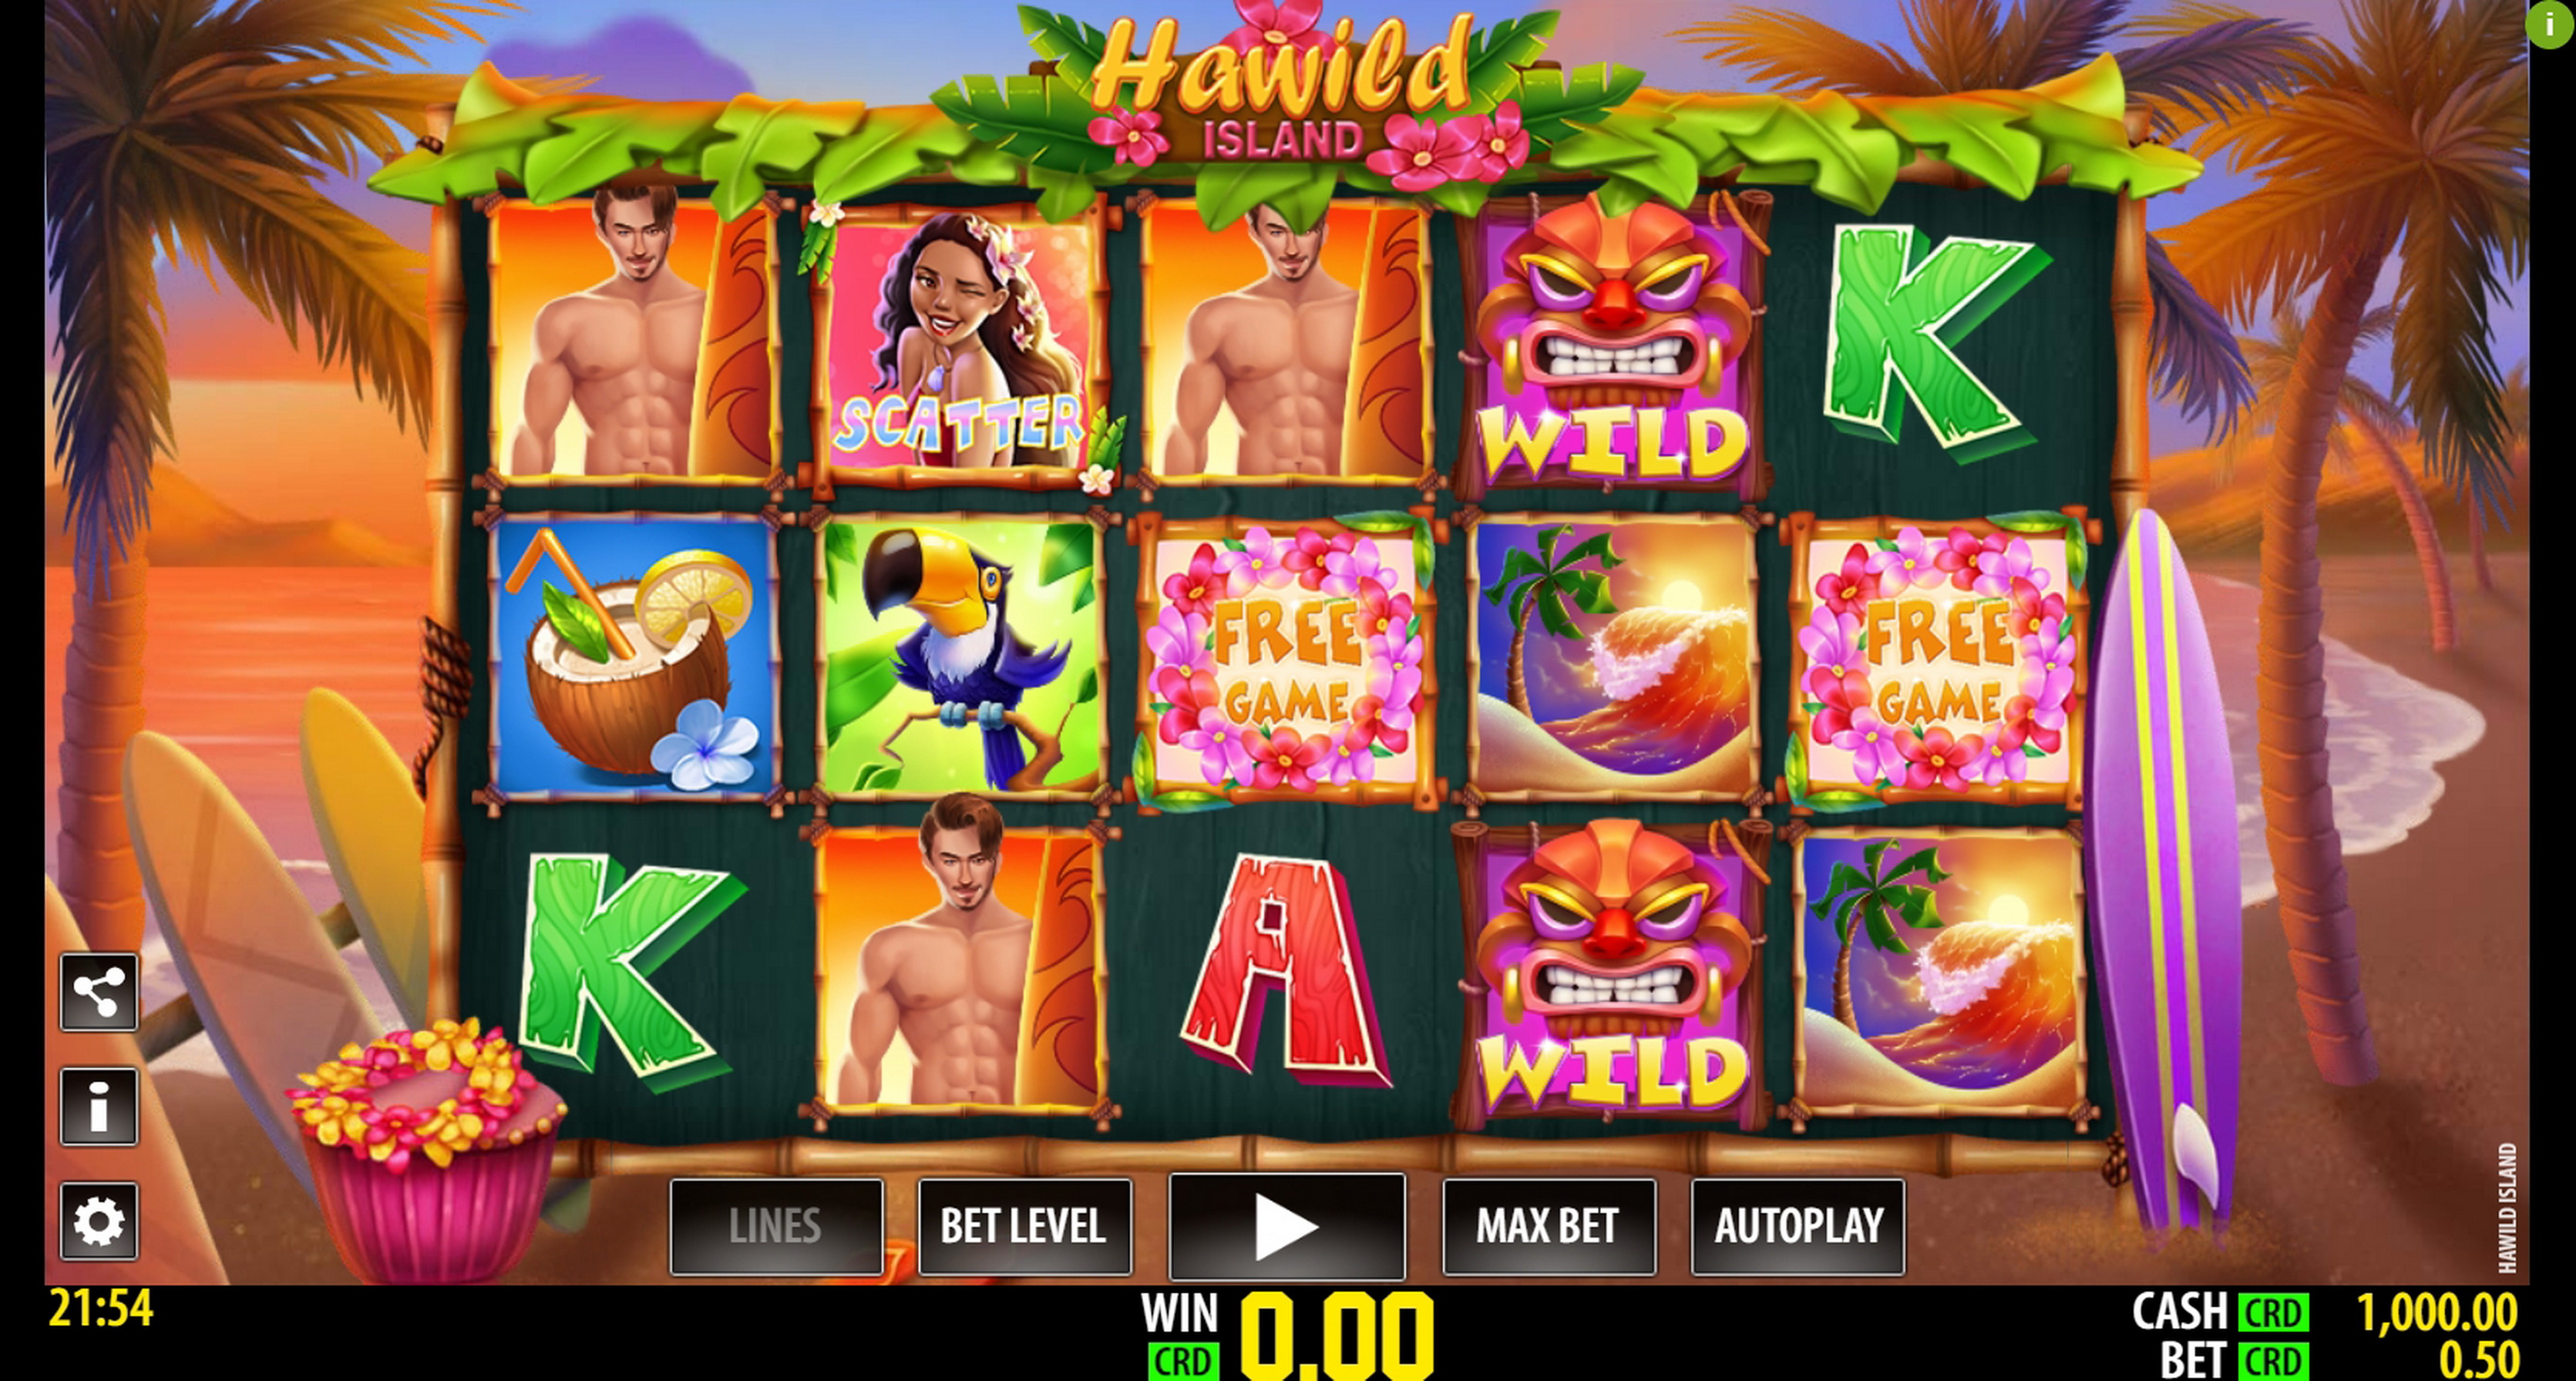 Reels in Hawild Island Slot Game by World Match